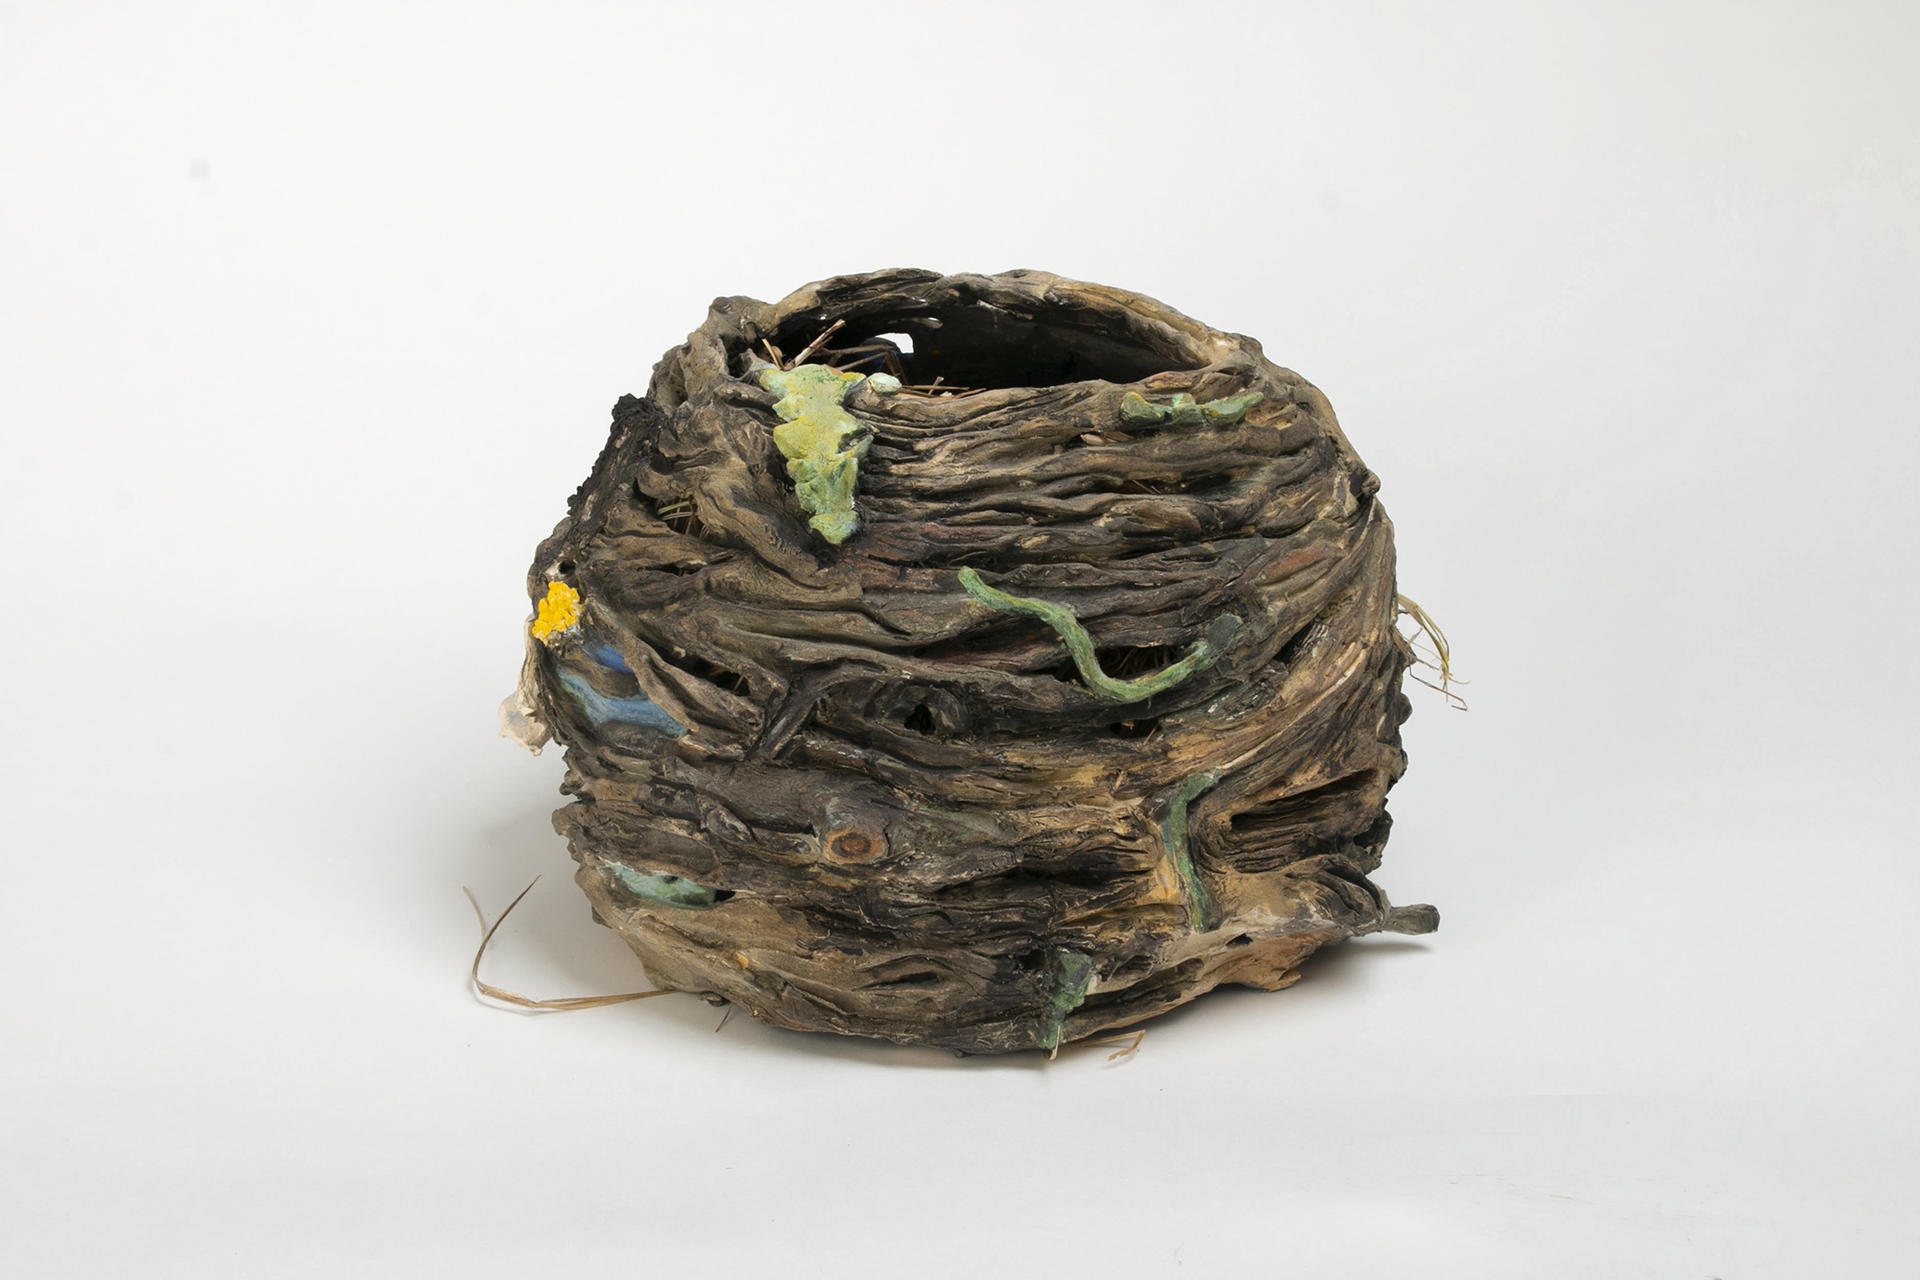 Ceramic nest sculpture with cattails and dandelions..